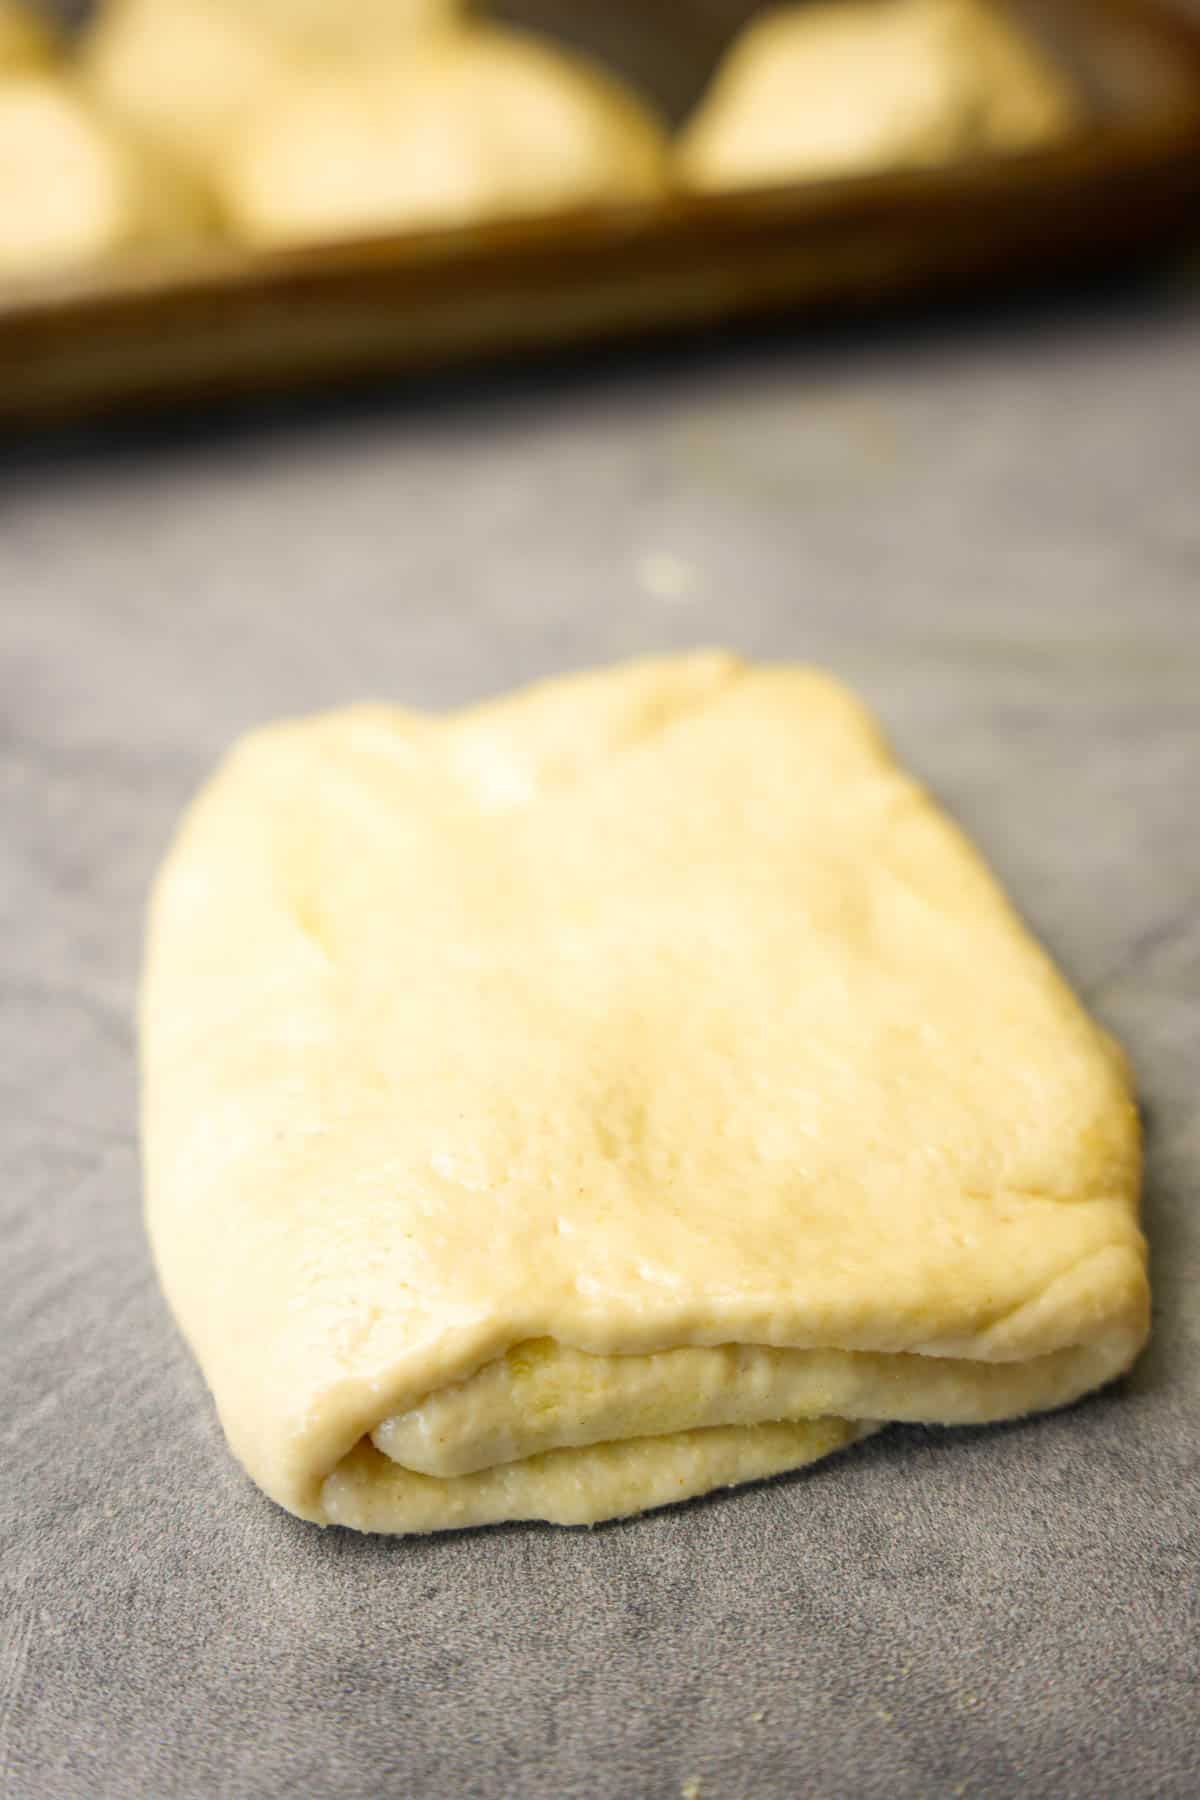 A close up showing a single formed portion of msemen dough waiting to be cooked. A tray in the background shows dough waiting to be formed.